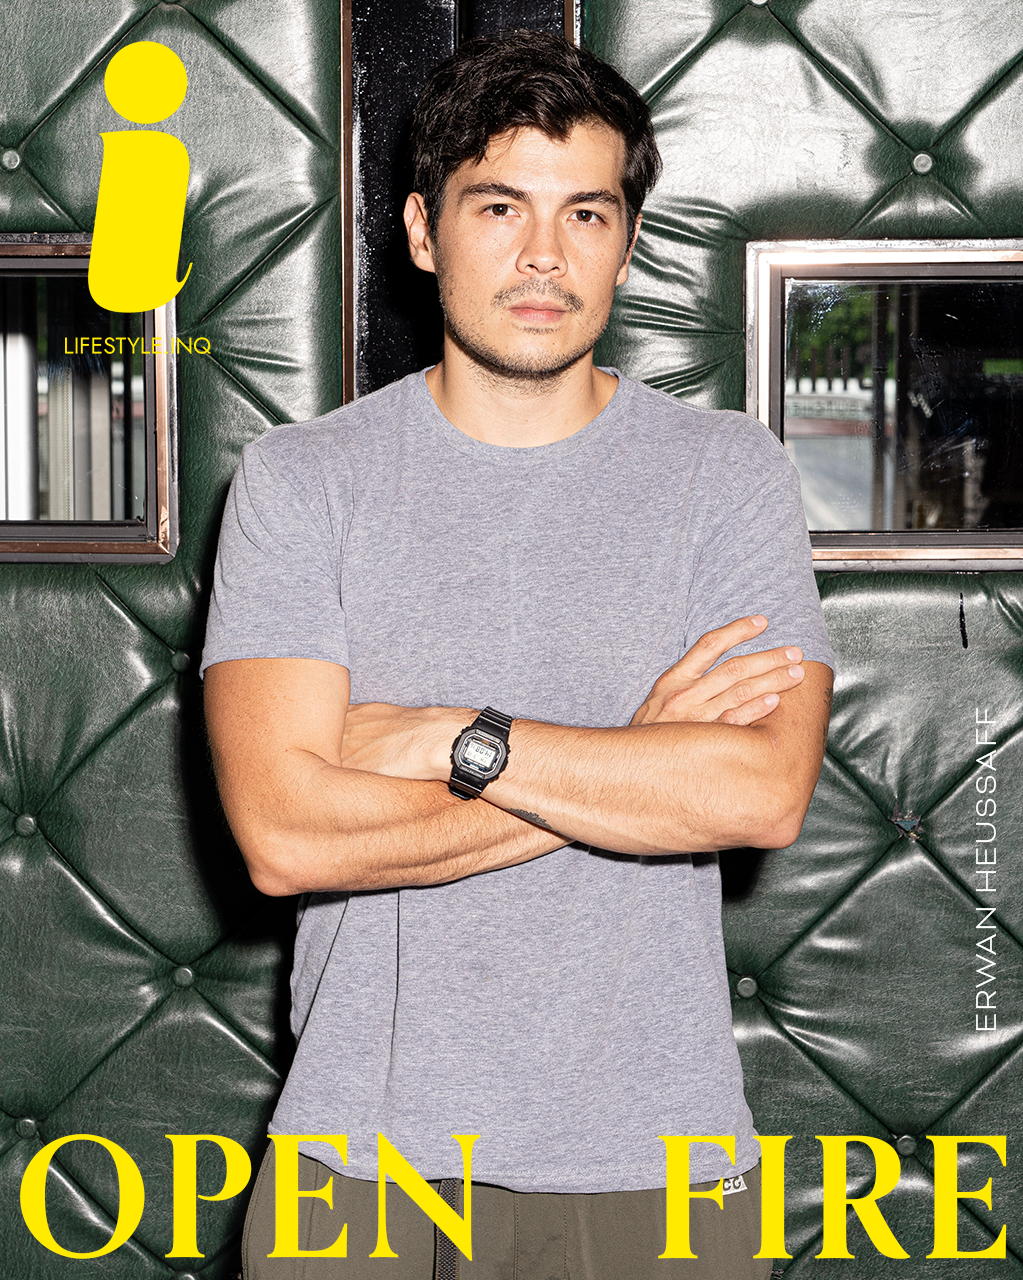 Open Fire: Erwan Heussaff is Carving a Niche in the Food Industry 